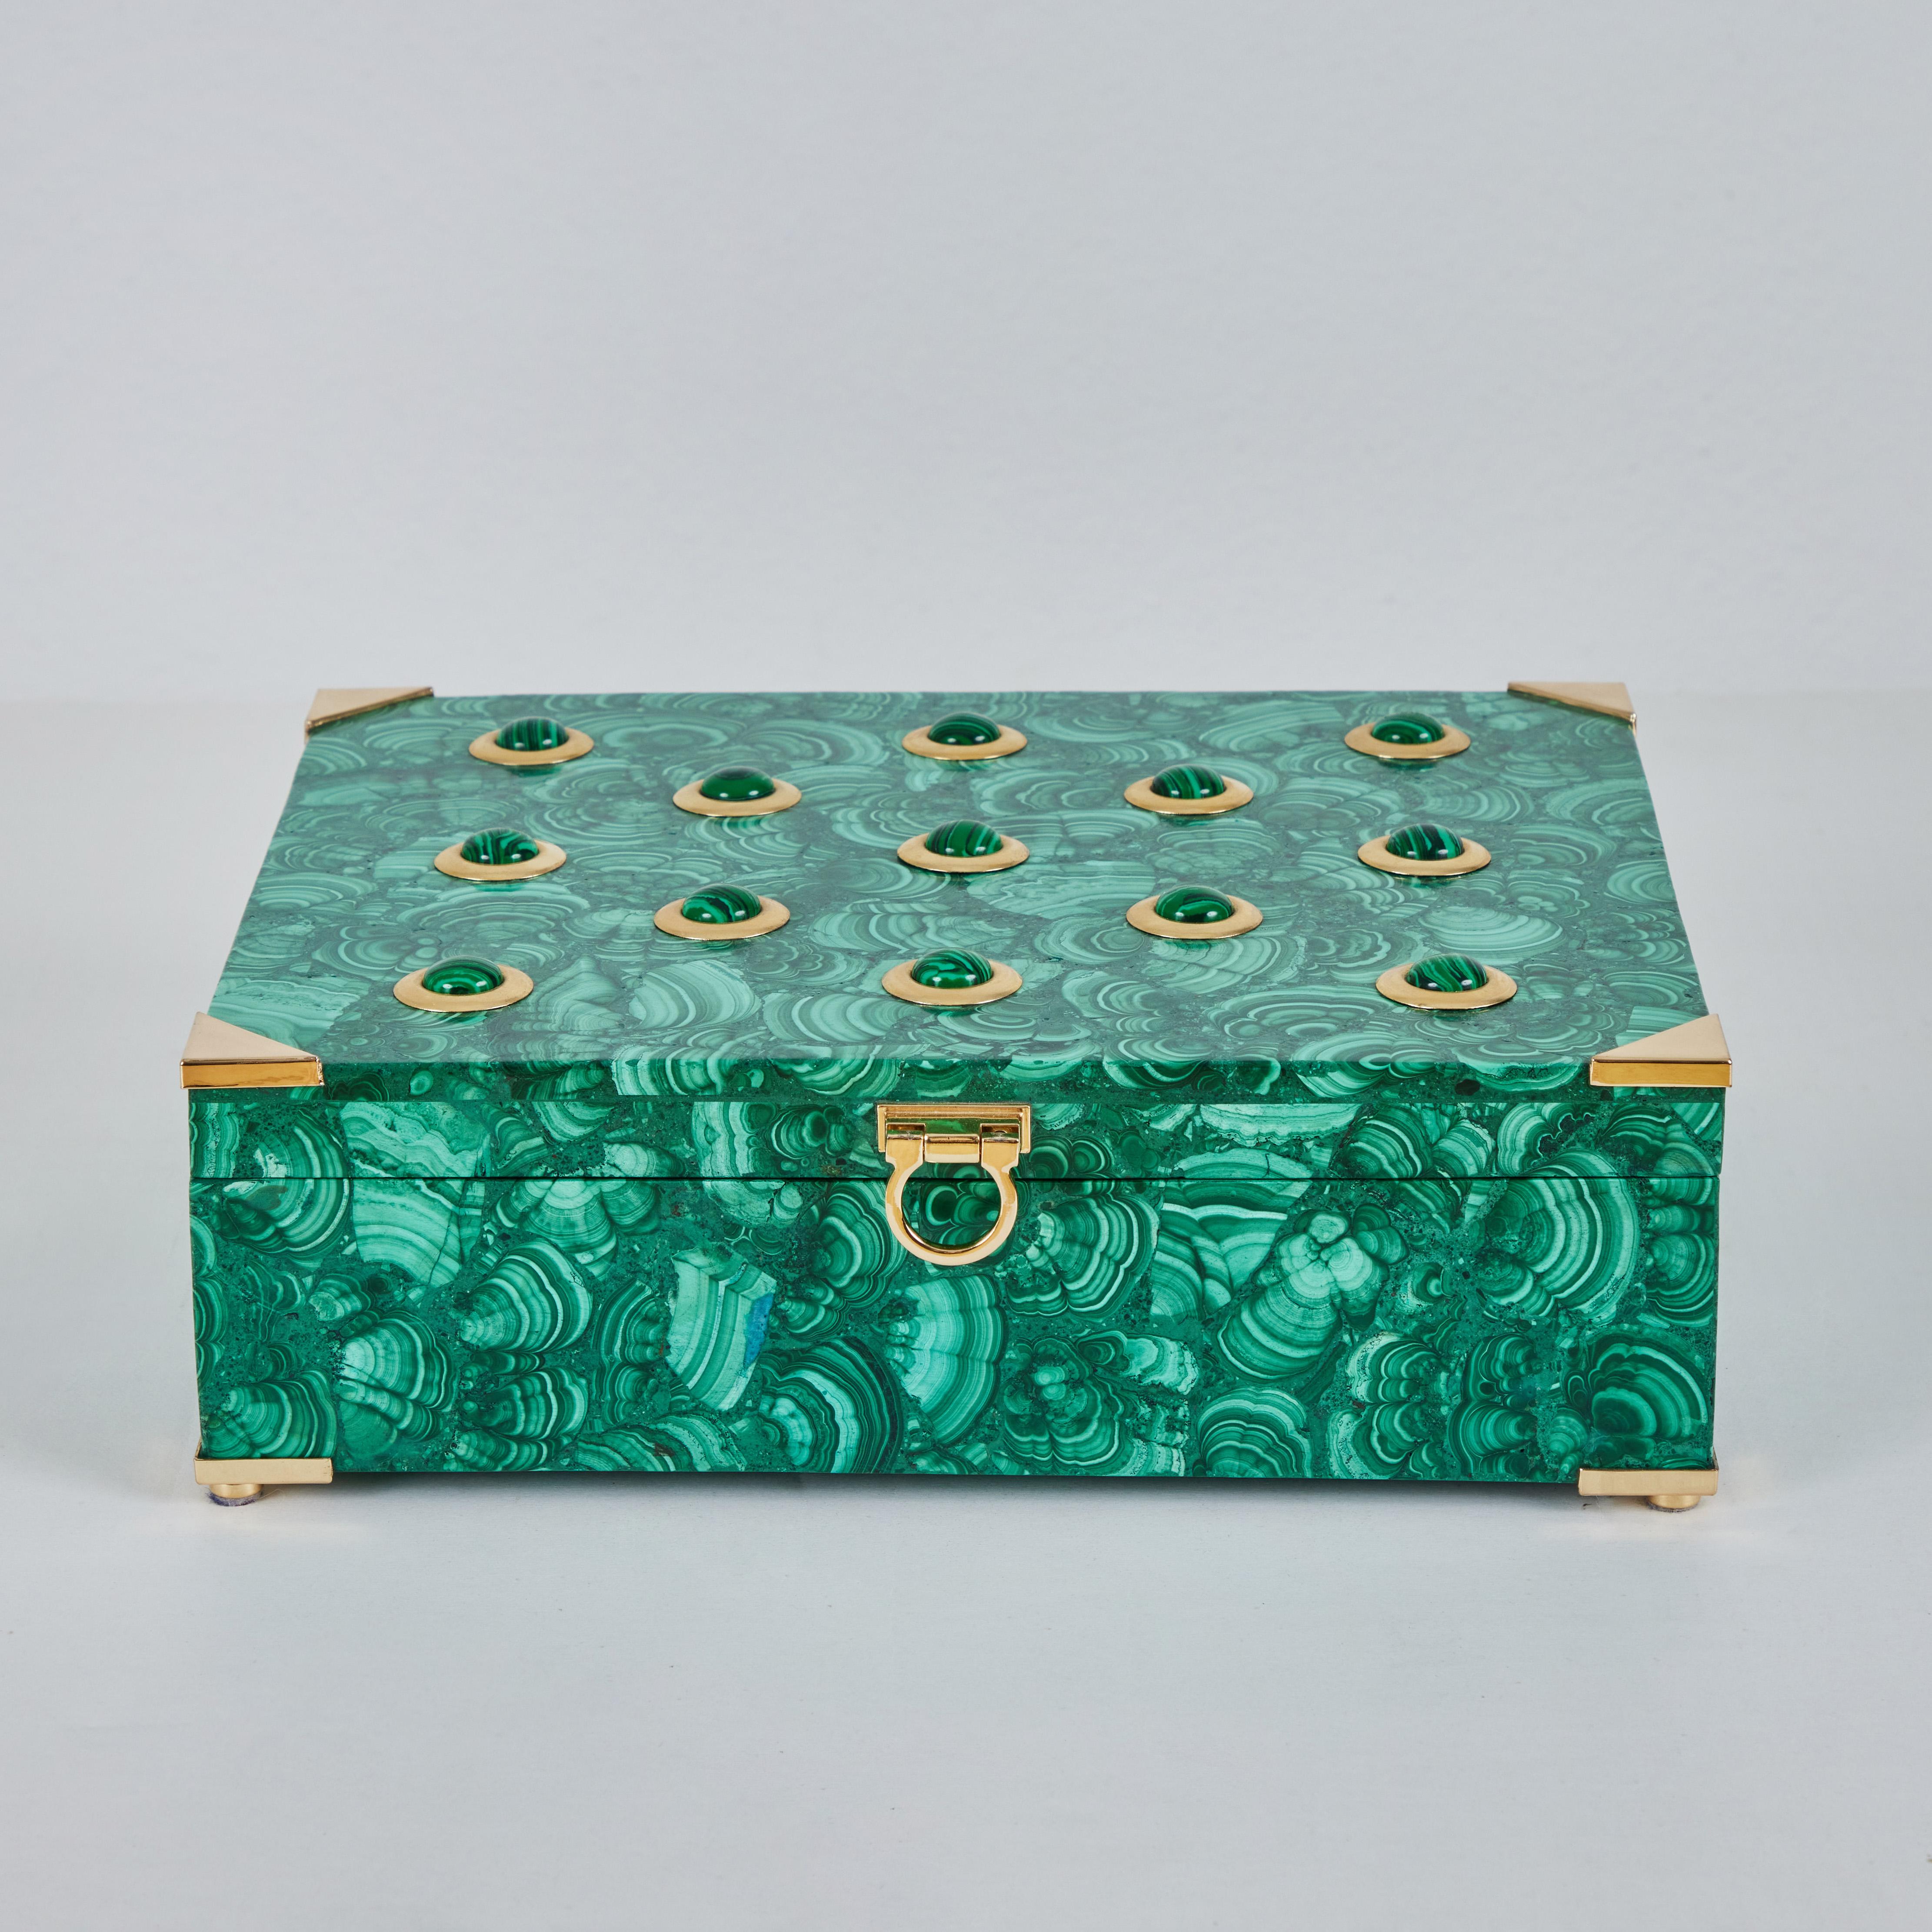 This is an impressive 14lbs malachite box with brass fittings and hardware.  This box showcases multiple shades of green, from light to dark.  What stands out about this piece is its size at 14lbs, and the beautiful swirls and patterns adorning the